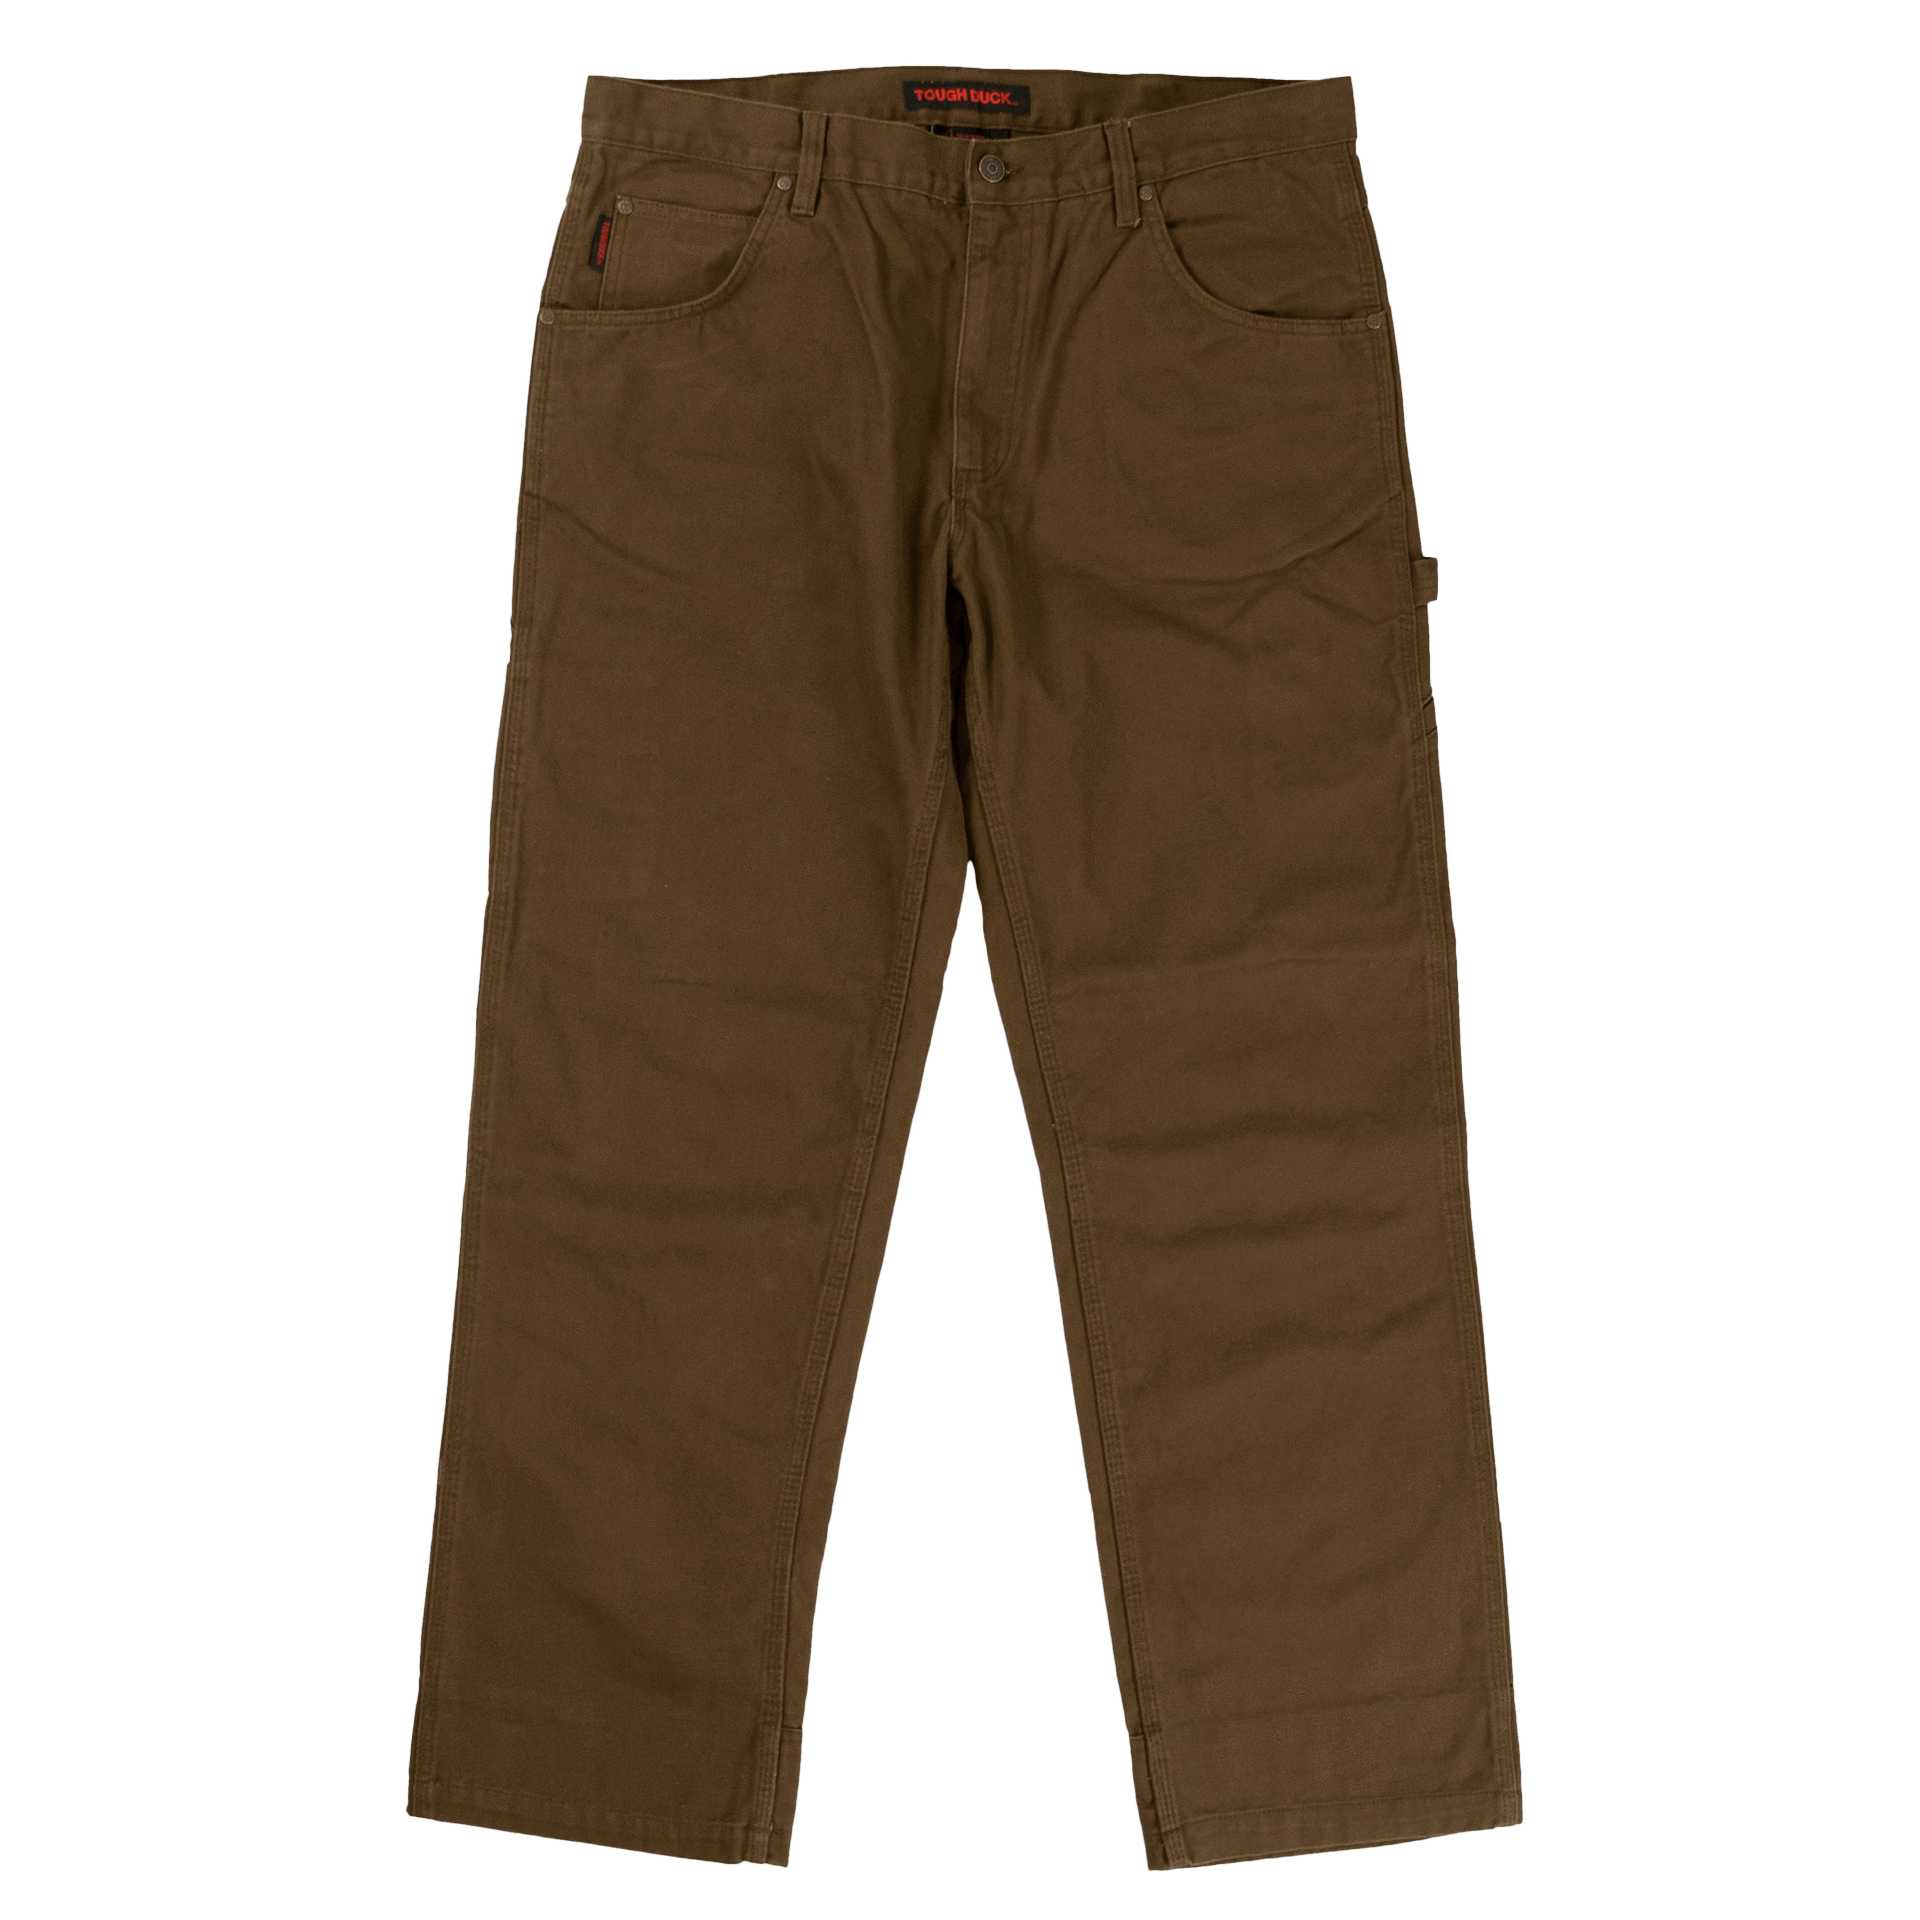 Tough Duck Washed Duck Pants - WP02 - Chestnut